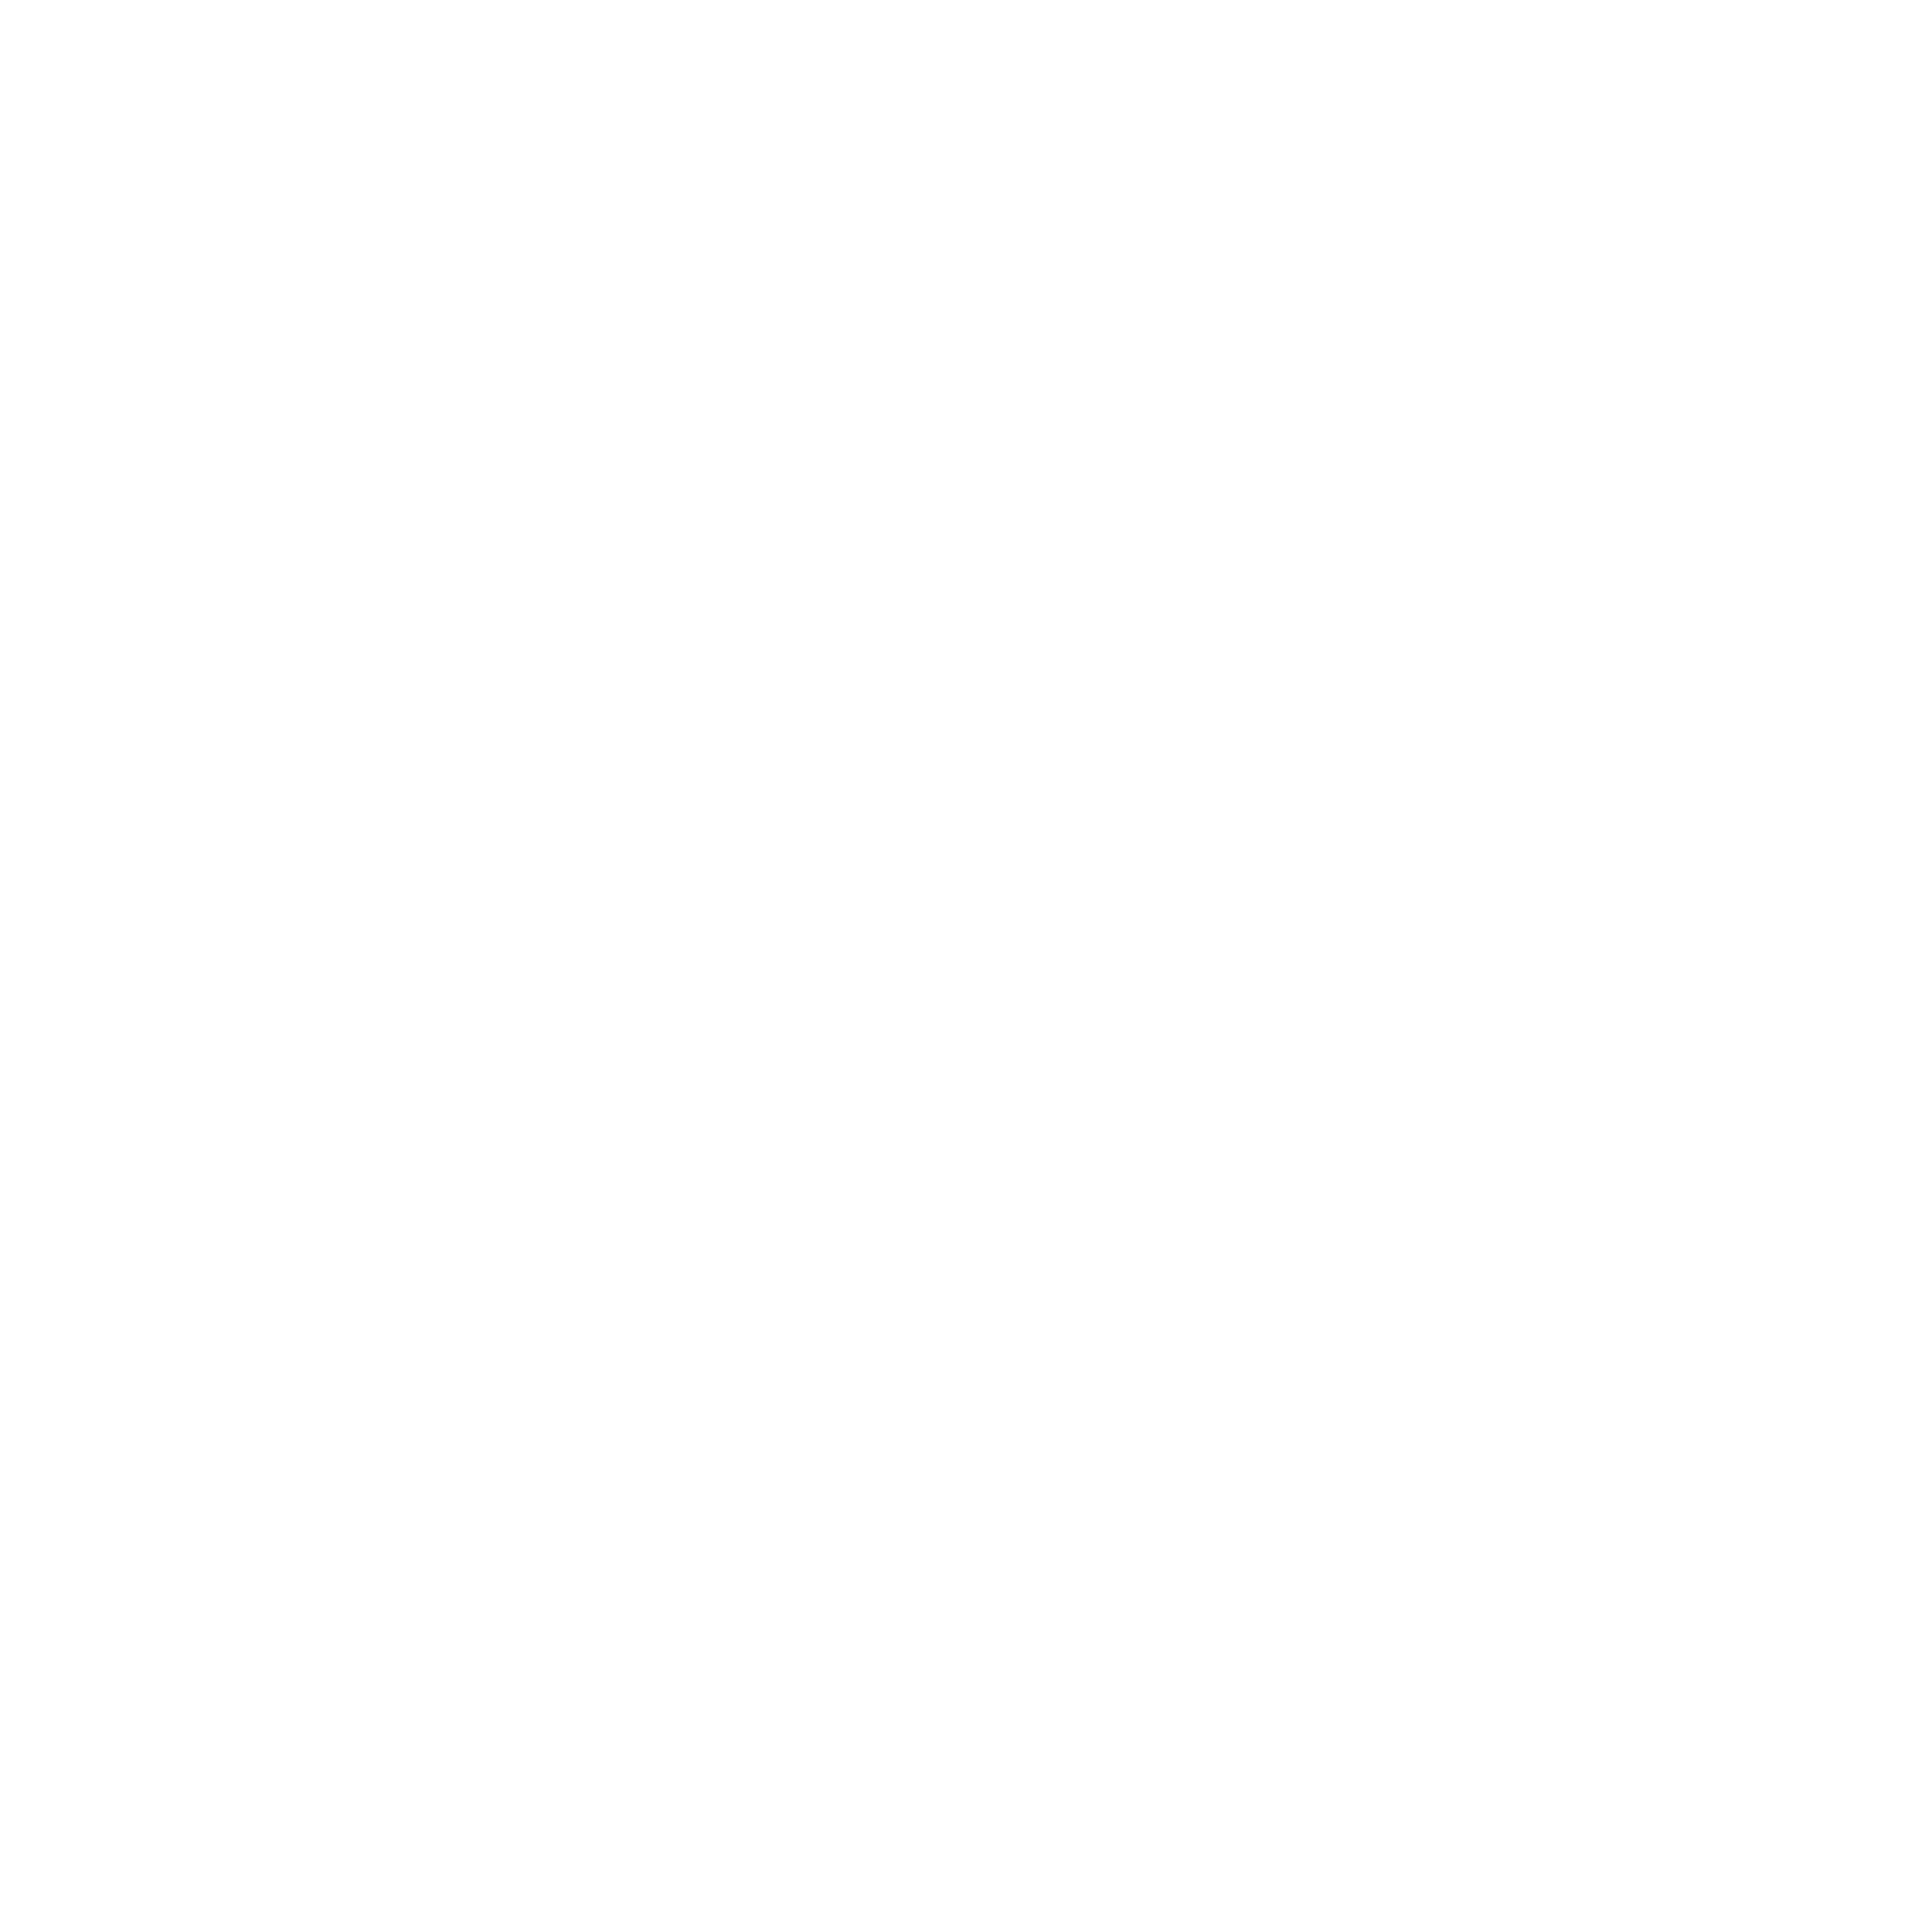 Download Prev - Supreme Lv 藍 色 PNG Image with No Background 